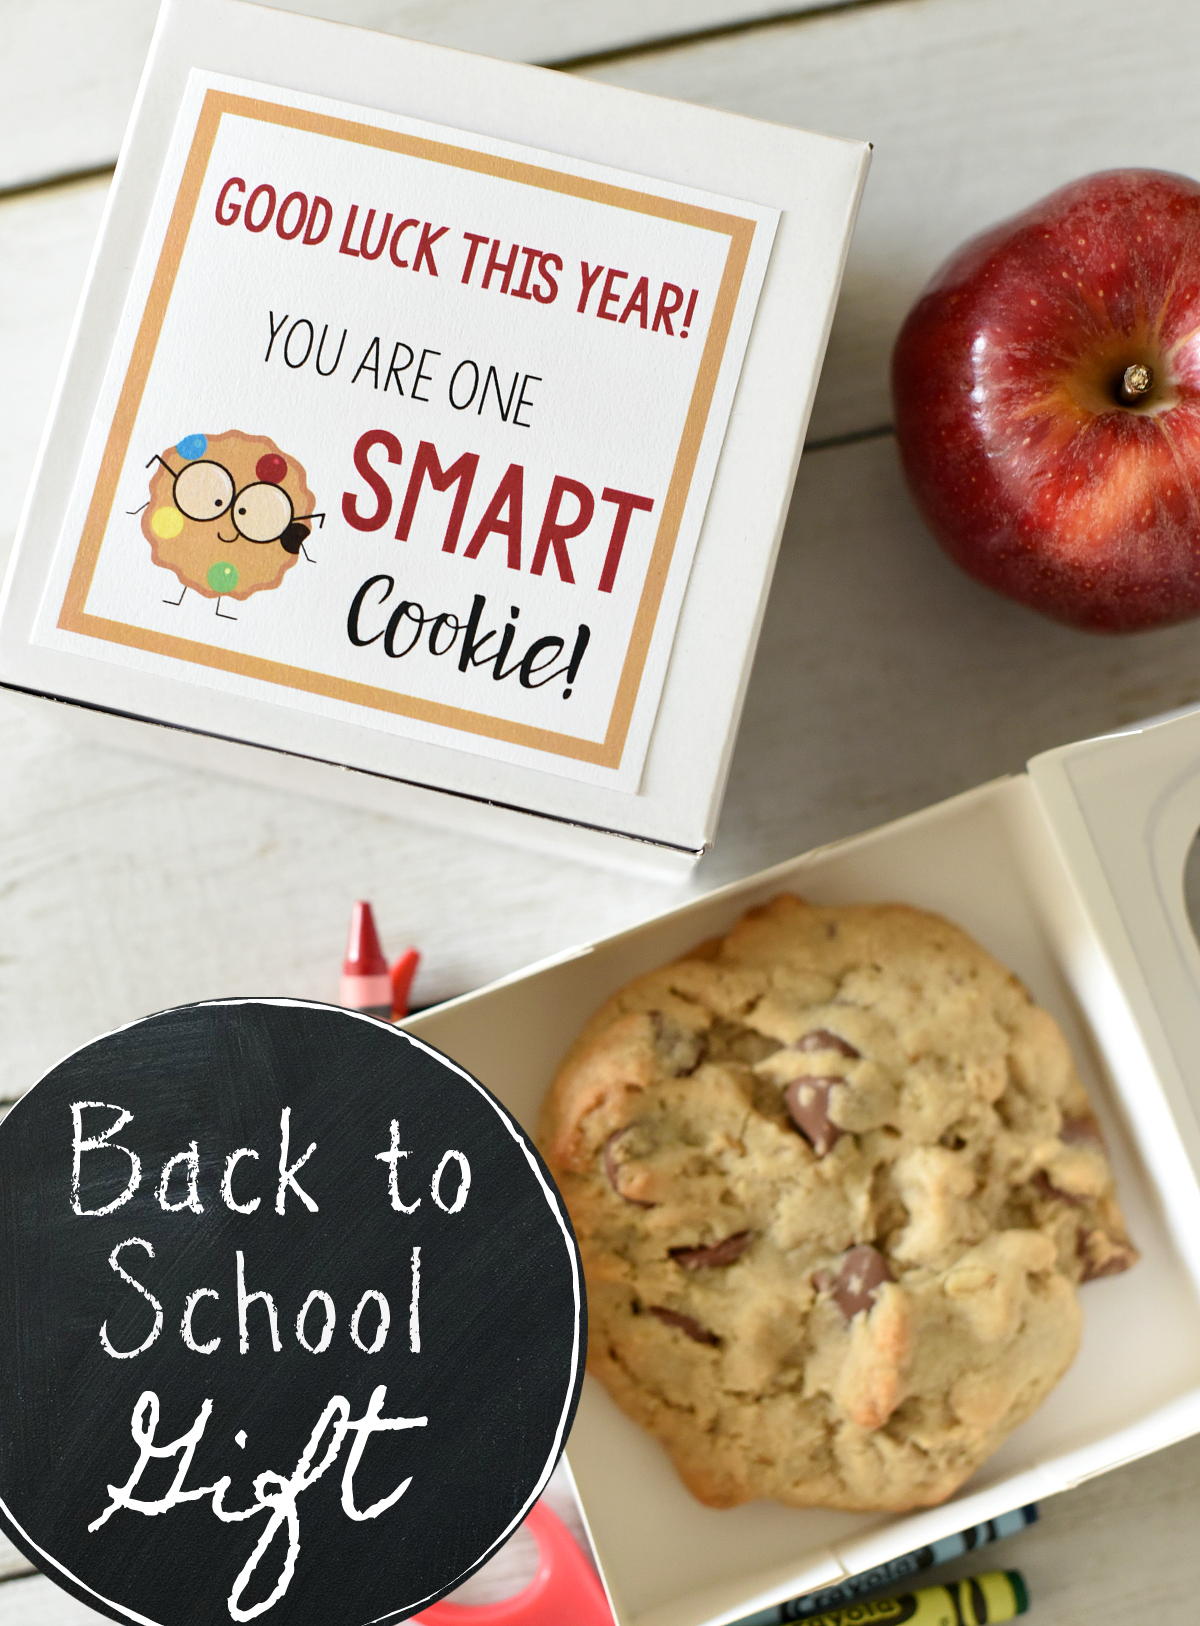 First Day of School Gifts: This cute "Smart Cookie" gift is fun for students on the first day of school. All you have to do is grab a cookie and add a tag and you're all set for back to school fun #backtoschool #kids #kidsgifts #giftideas